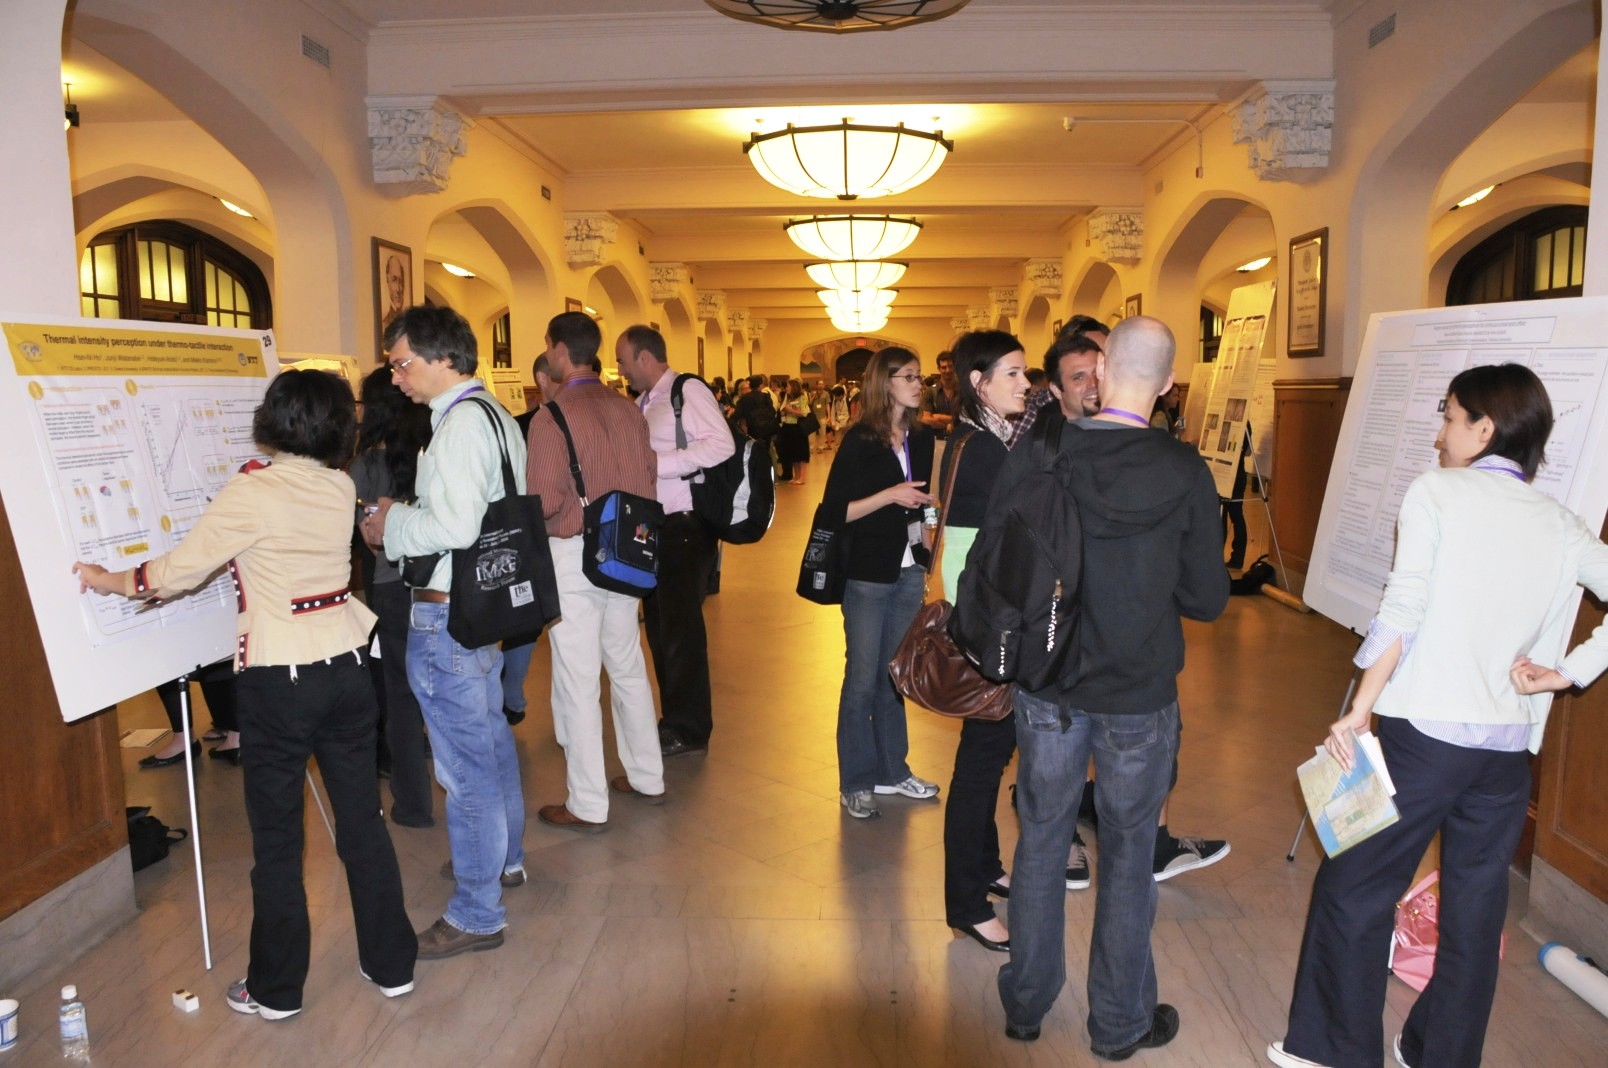 Delegates to the 10th annual meeting of the International Multisensory Research Forum view poster session in the Lincoln Corridor of Shepard Hall.